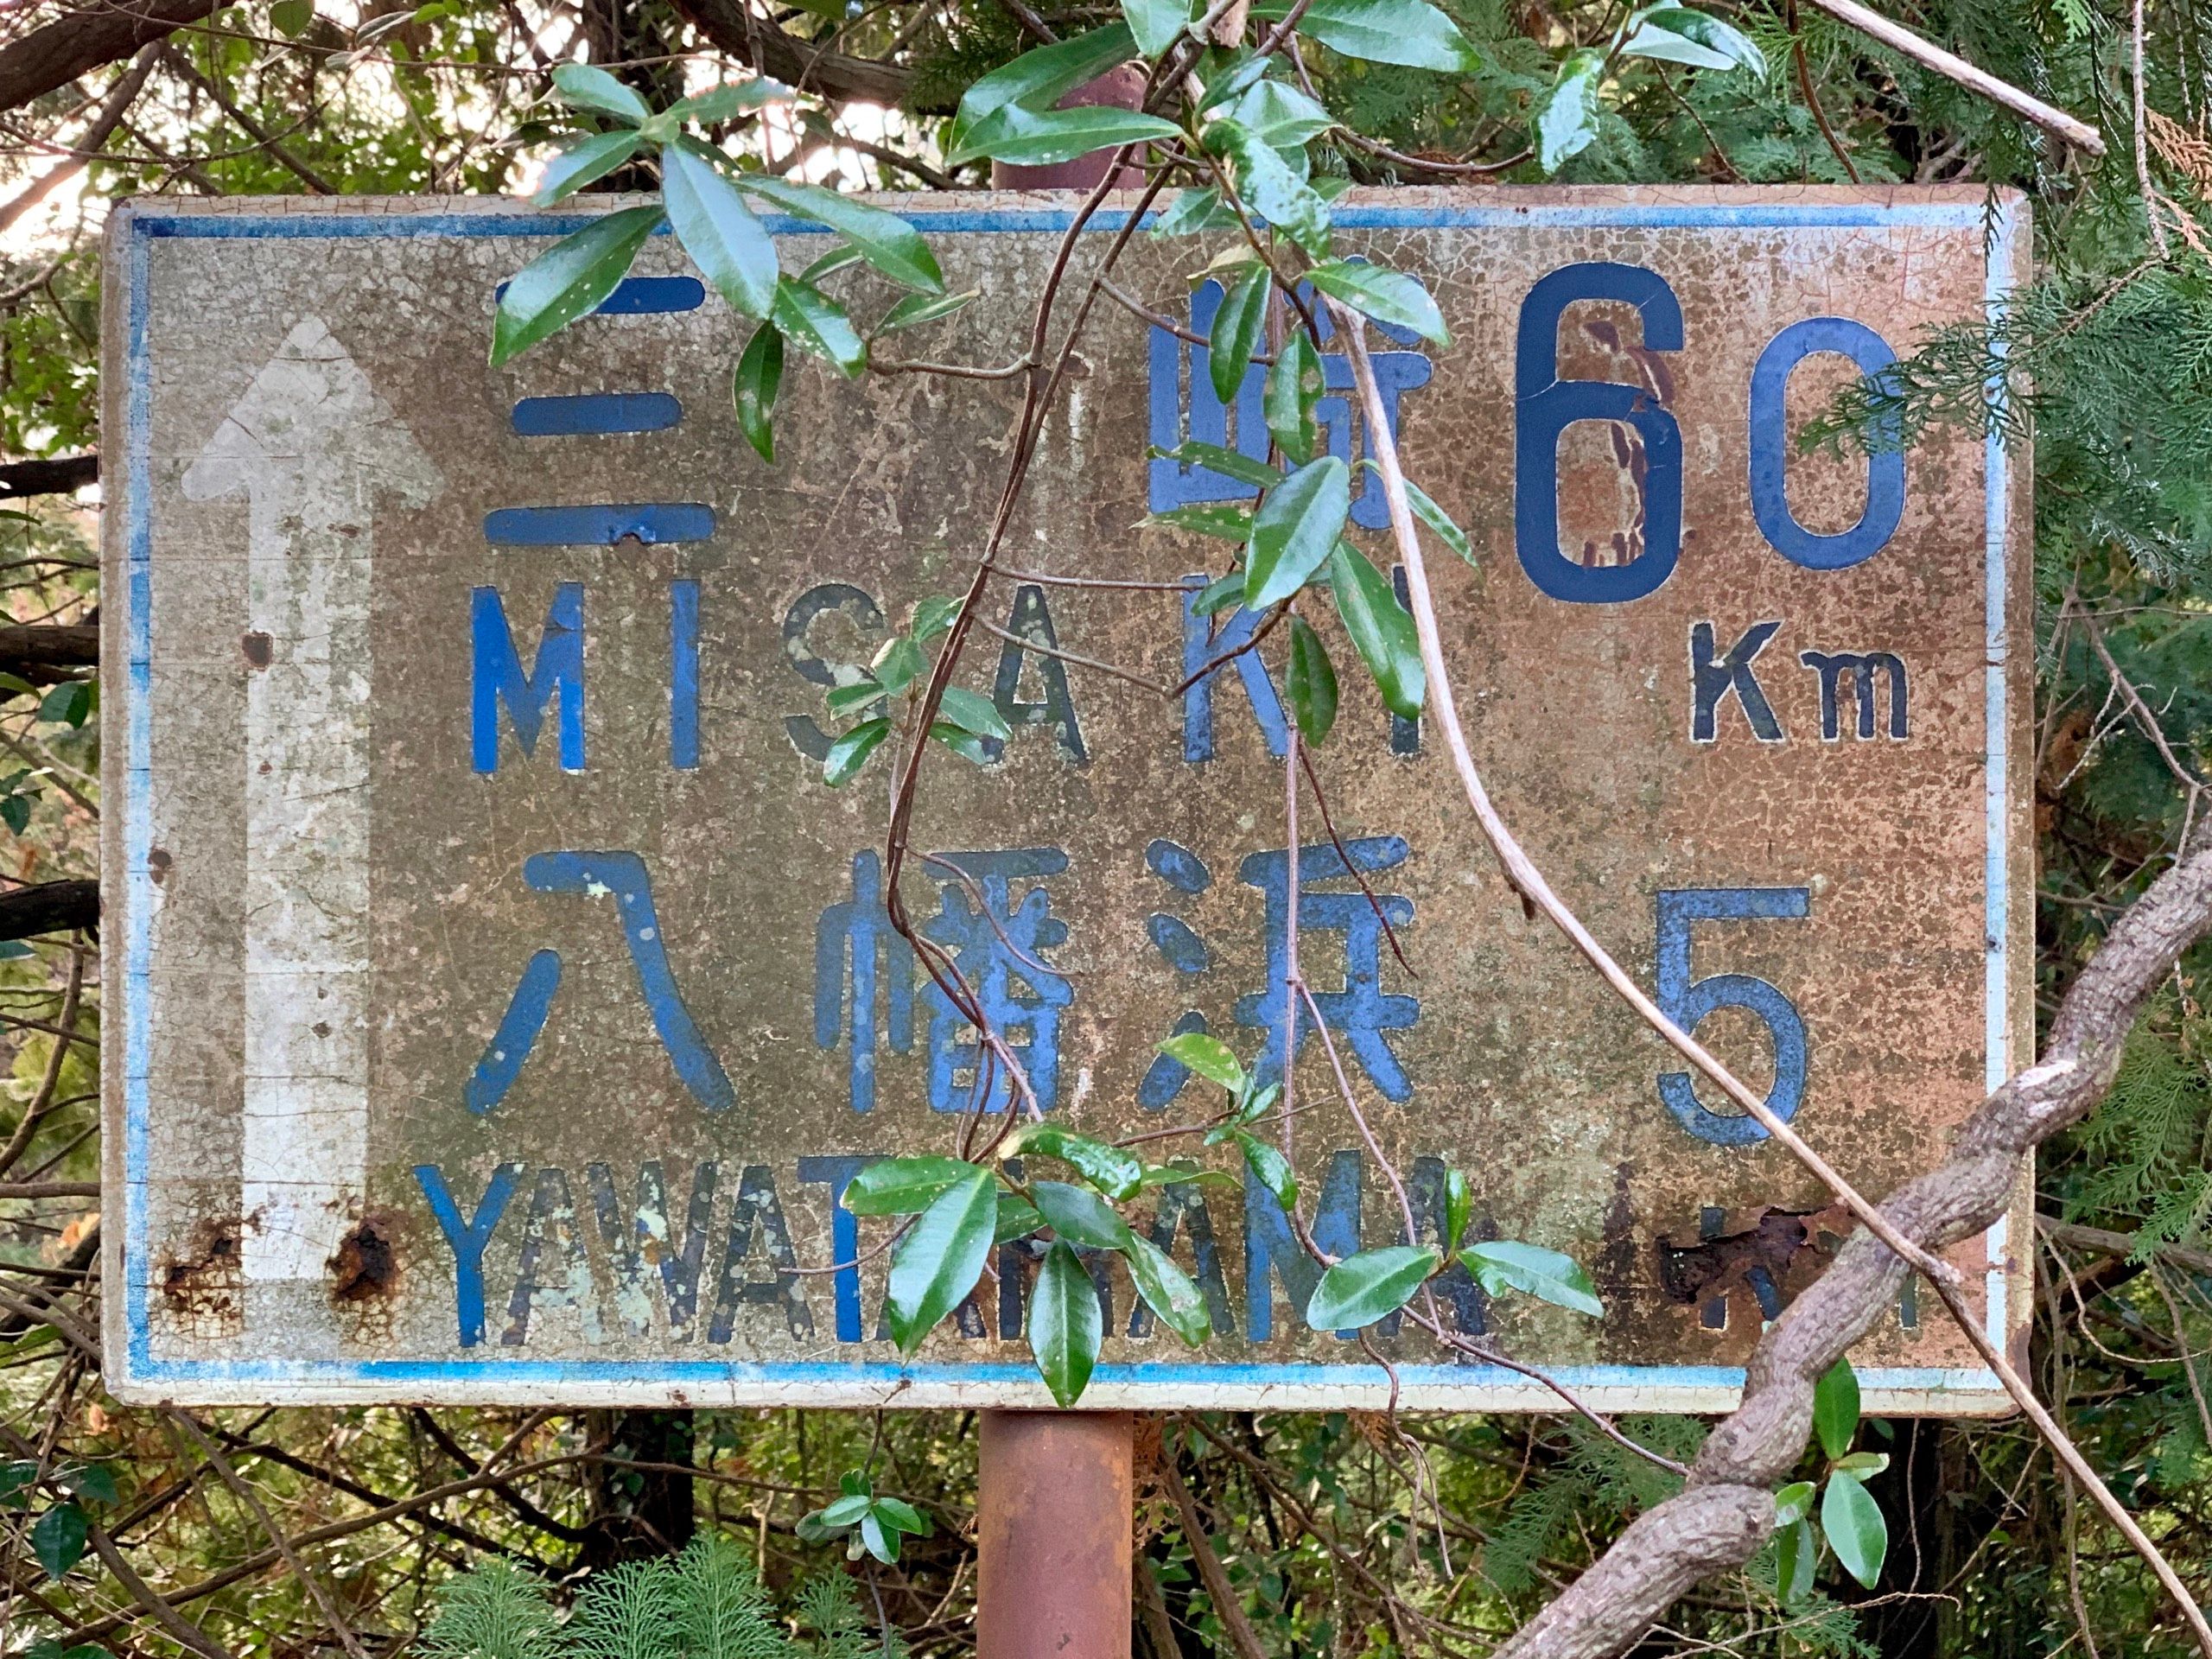 A rusty and overgrown sign shows the distances to Misaki (60 km) and Yawatahama (5 km).